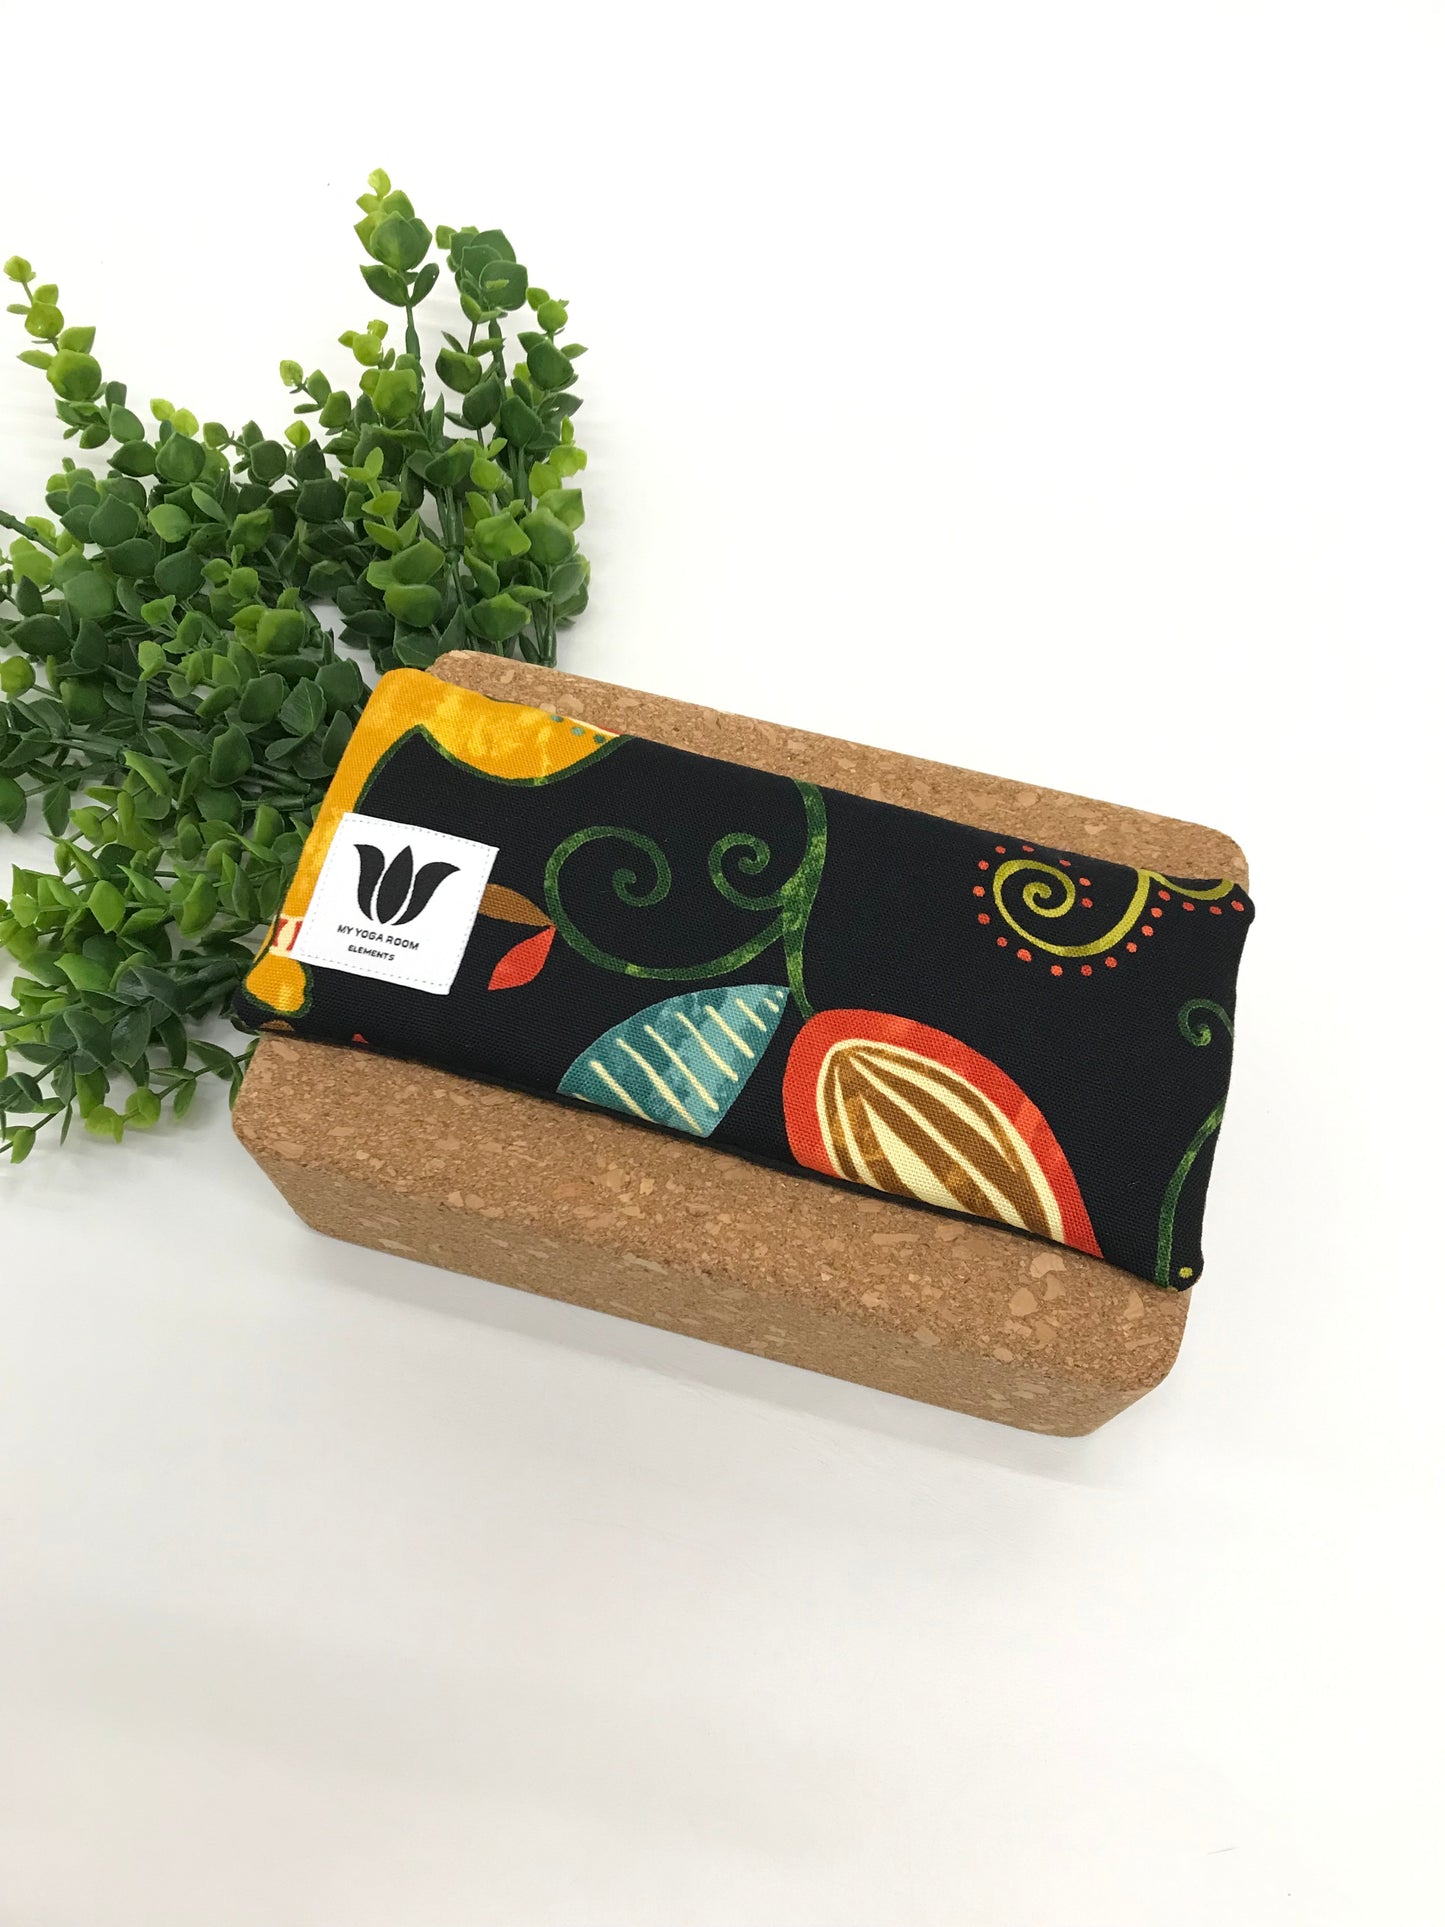 Yoga eye pillow, unscented, therapeutically weighted to soothe eye strain and stress or enhance your savasana. Handcrafted in Canada by My Yoga Room Elements. Rainbow black nature print and bamboo fabric.